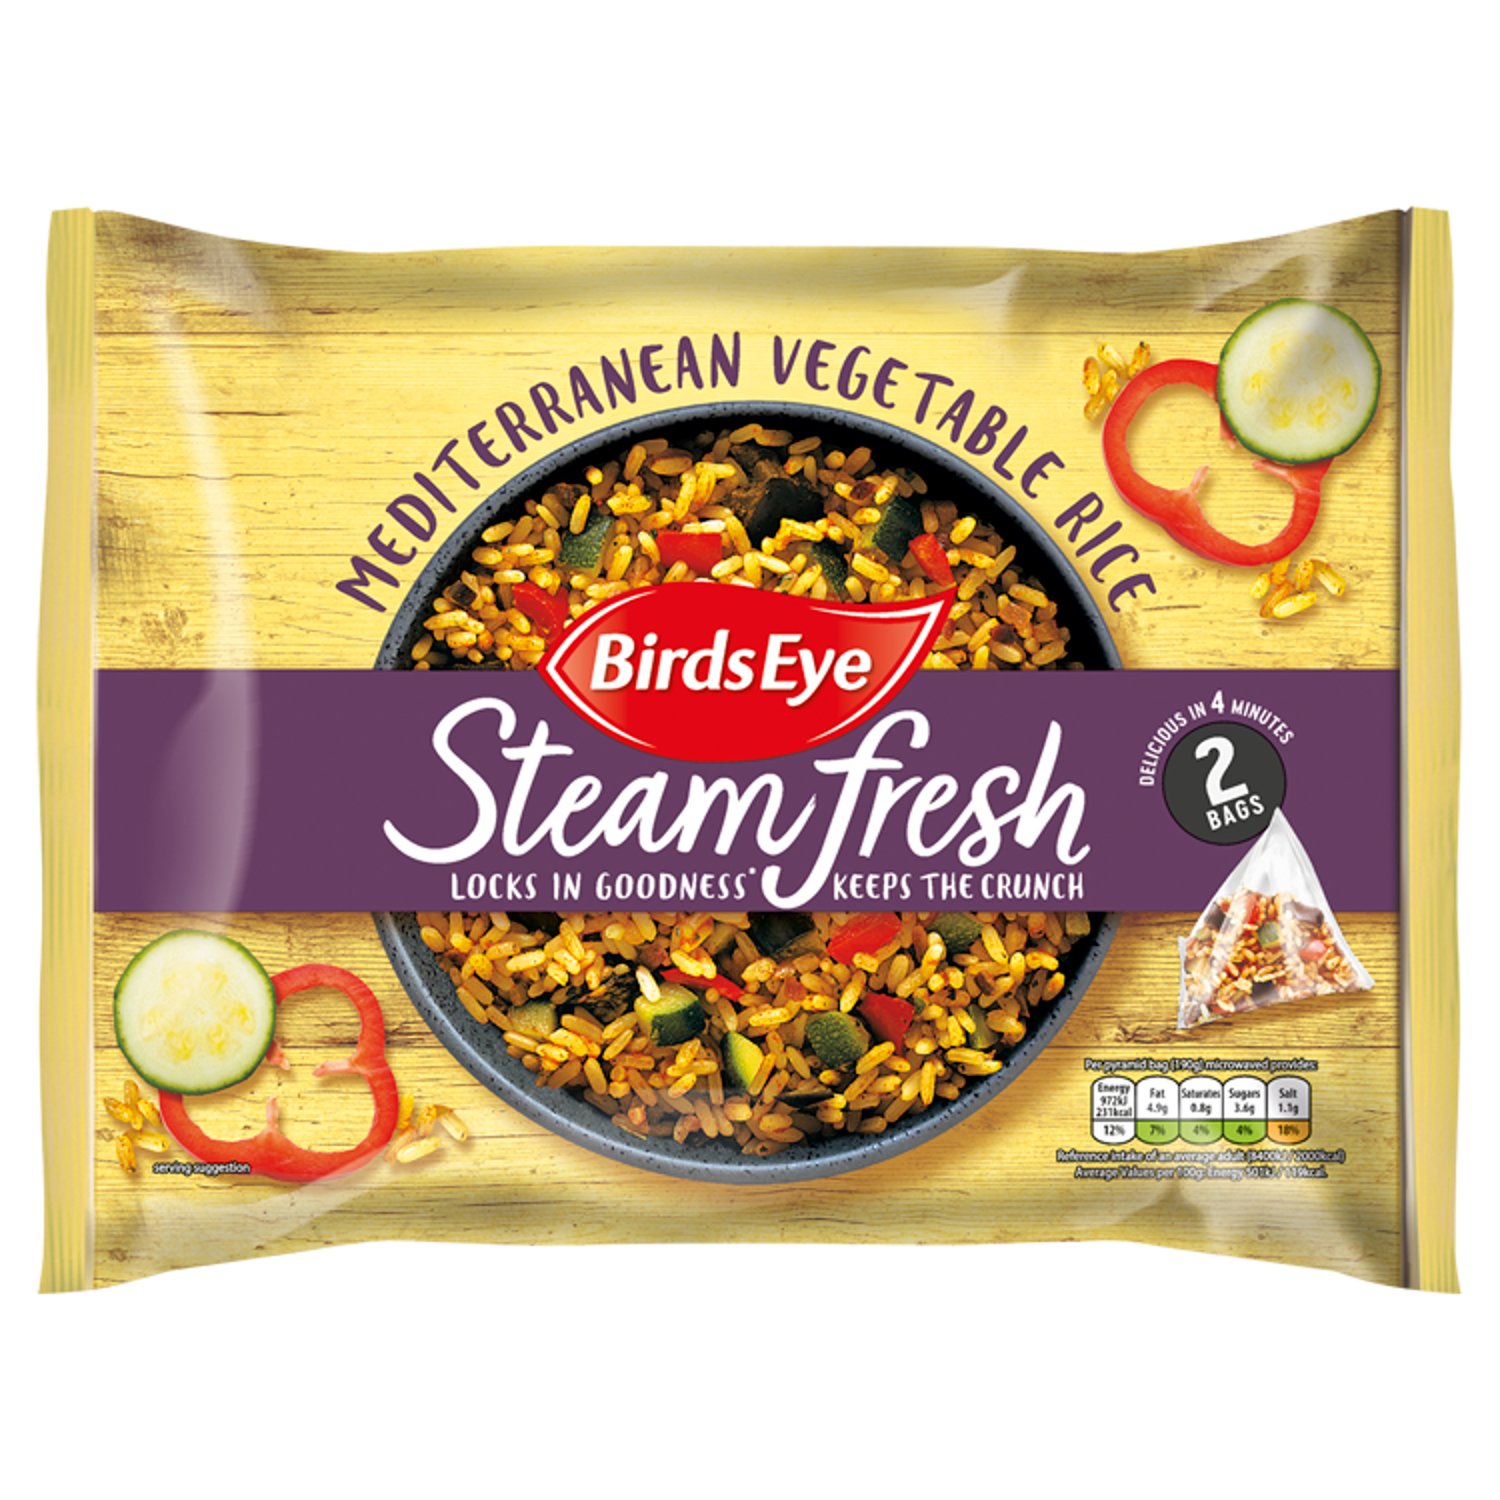 Looking to bring a little pizzazz to your weeknight dinners? Try something new with Birds Eye Steamfresh Mediterranean Vegetable Rice Steam Bags

Our Mediterranean vegetable rice contains courgette, red pepper, onion and grilled aubergines that are seasoned to perfection with garlic, basil and oregano. 

All of our Birds Eye vegetable rice is steamed in our unique pyramid steam bags and turned into frozen rice, allowing the flavours to infuse gently for an unbelievably tasty rice dish in minutes. You may just have found the perfect accompaniment to your weeknight dinners with this microwavable rice...

Each portion is a source of vitamin C* and low in fat. Hello, nutritious, yummy, vibrant vegetable-rich rice sides!
*Vitamin C contributes to the normal function of the immune system.